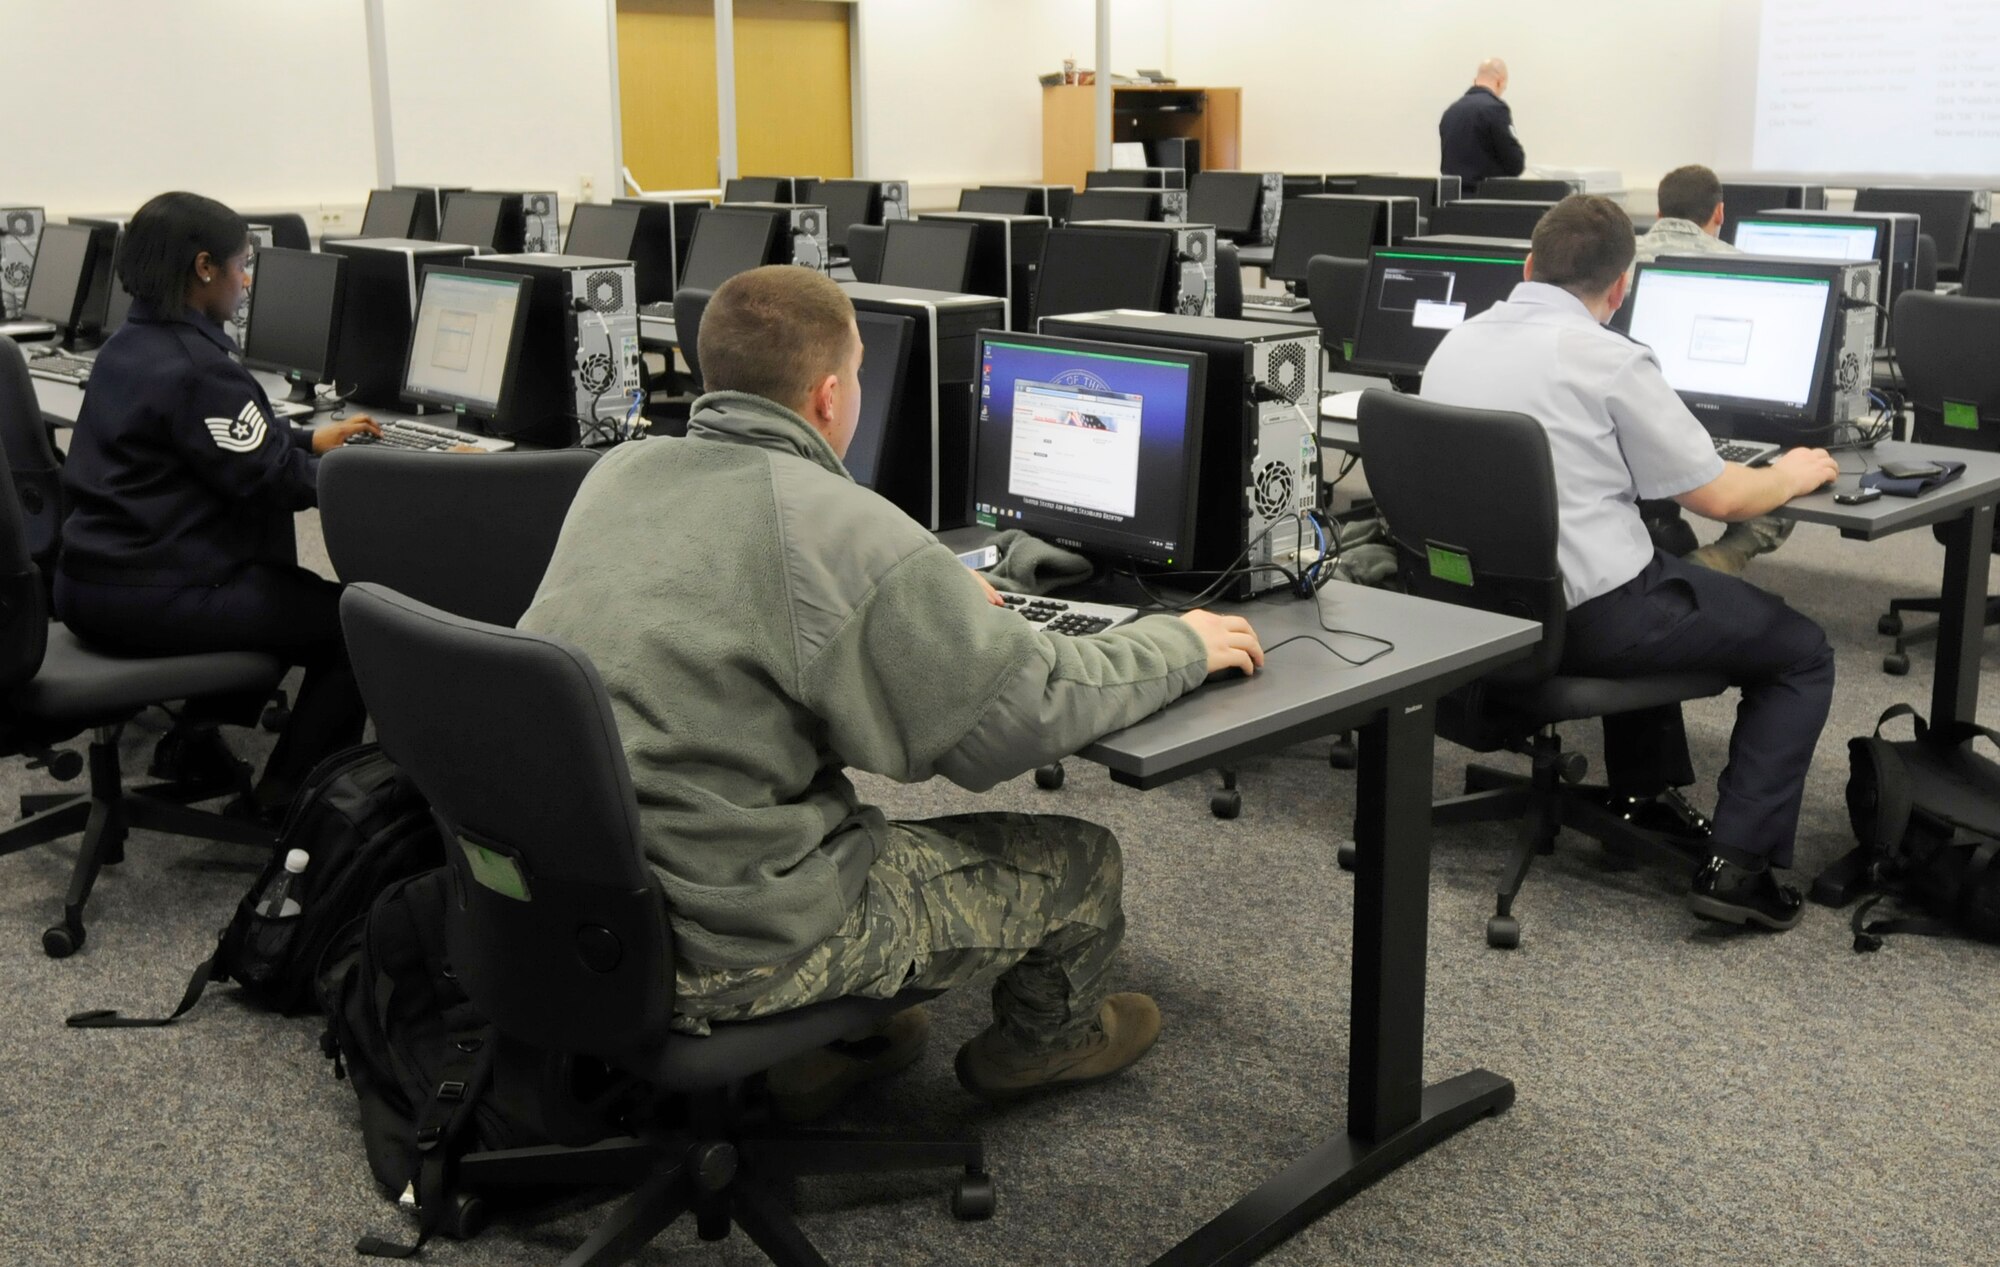 U.S. Air Force Airmen set up e-mail accounts at the new Ramstein Inprocessing building on Ramstein Air Base, Germany, Feb. 14, 2011. The 86th Airlift Wing recently kicked off a two-day inprocessing program to help ease the transition process for all new Airmen arriving to the Kaiserslautern Military Community.  (U.S. Air Force photo by Airman Kendra Alba)